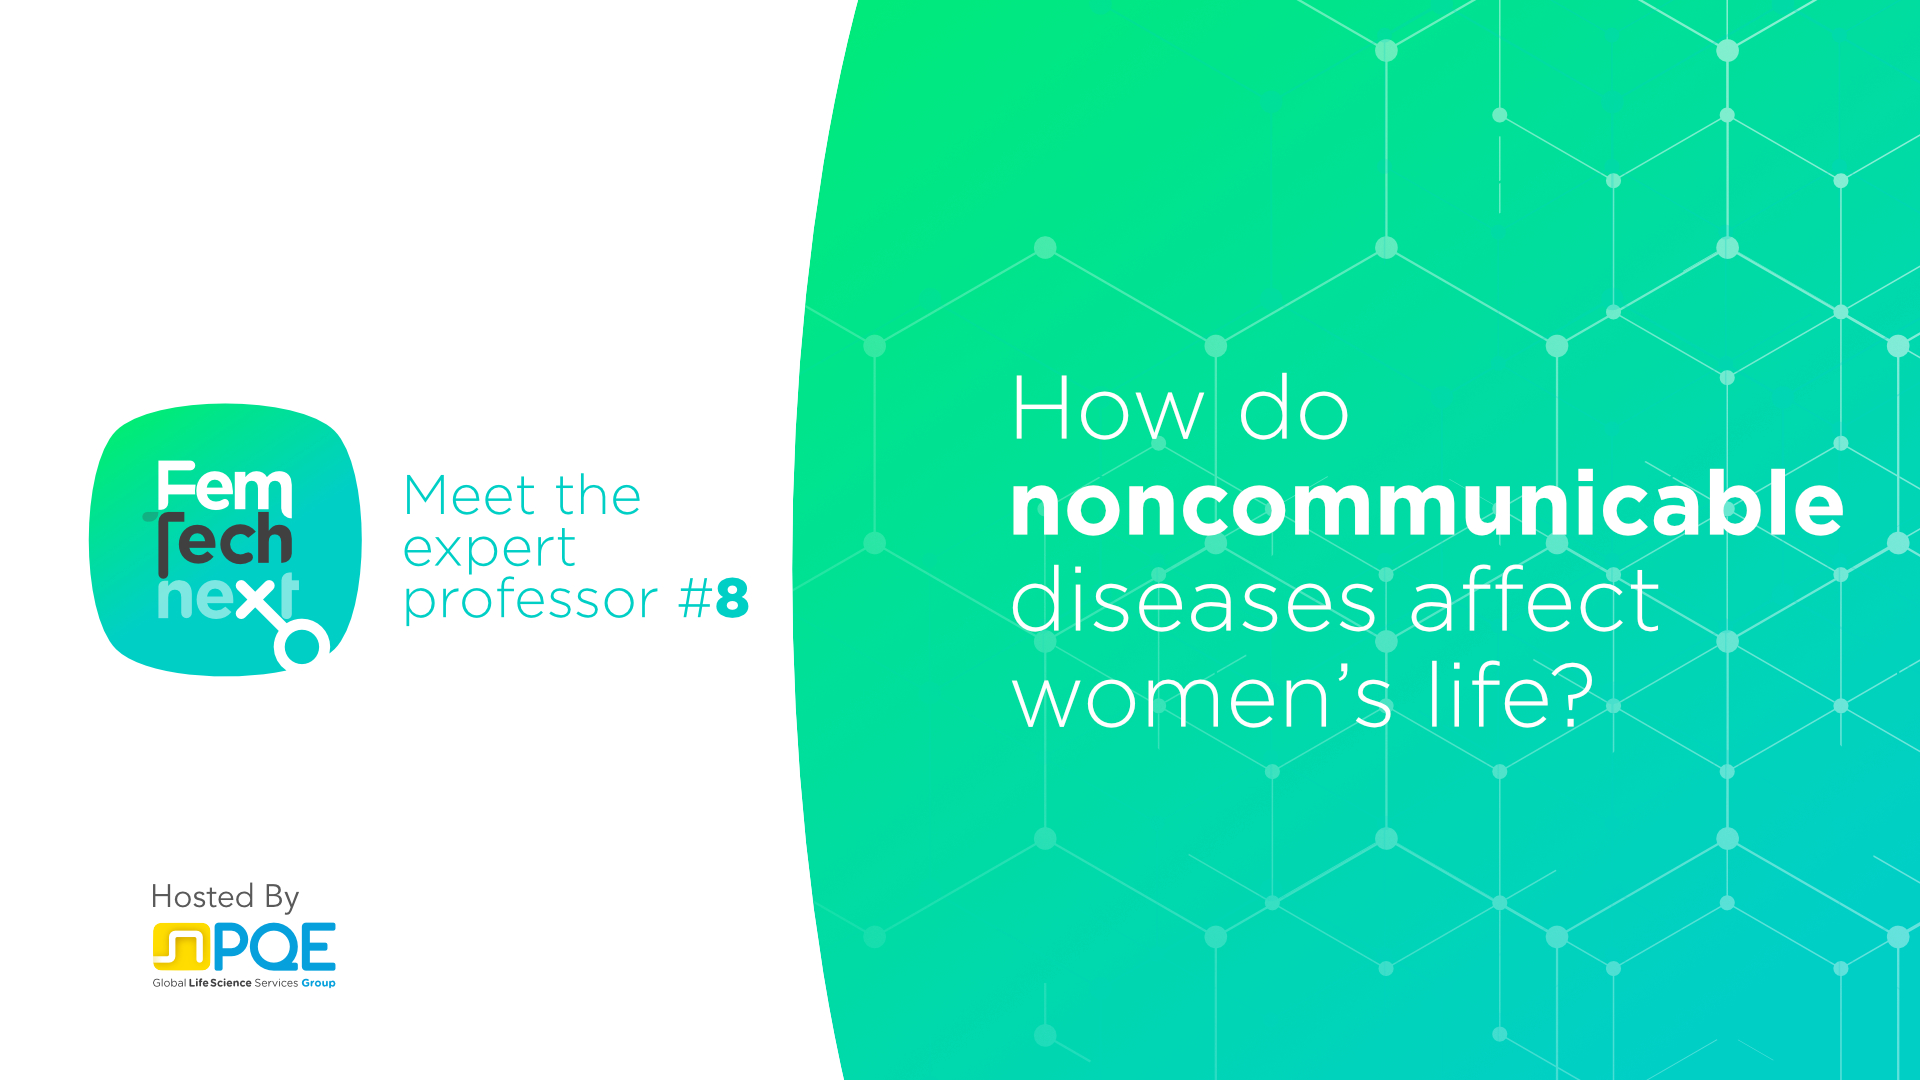 Ep. 6 - How do noncommunicable diseases affect women’s life?